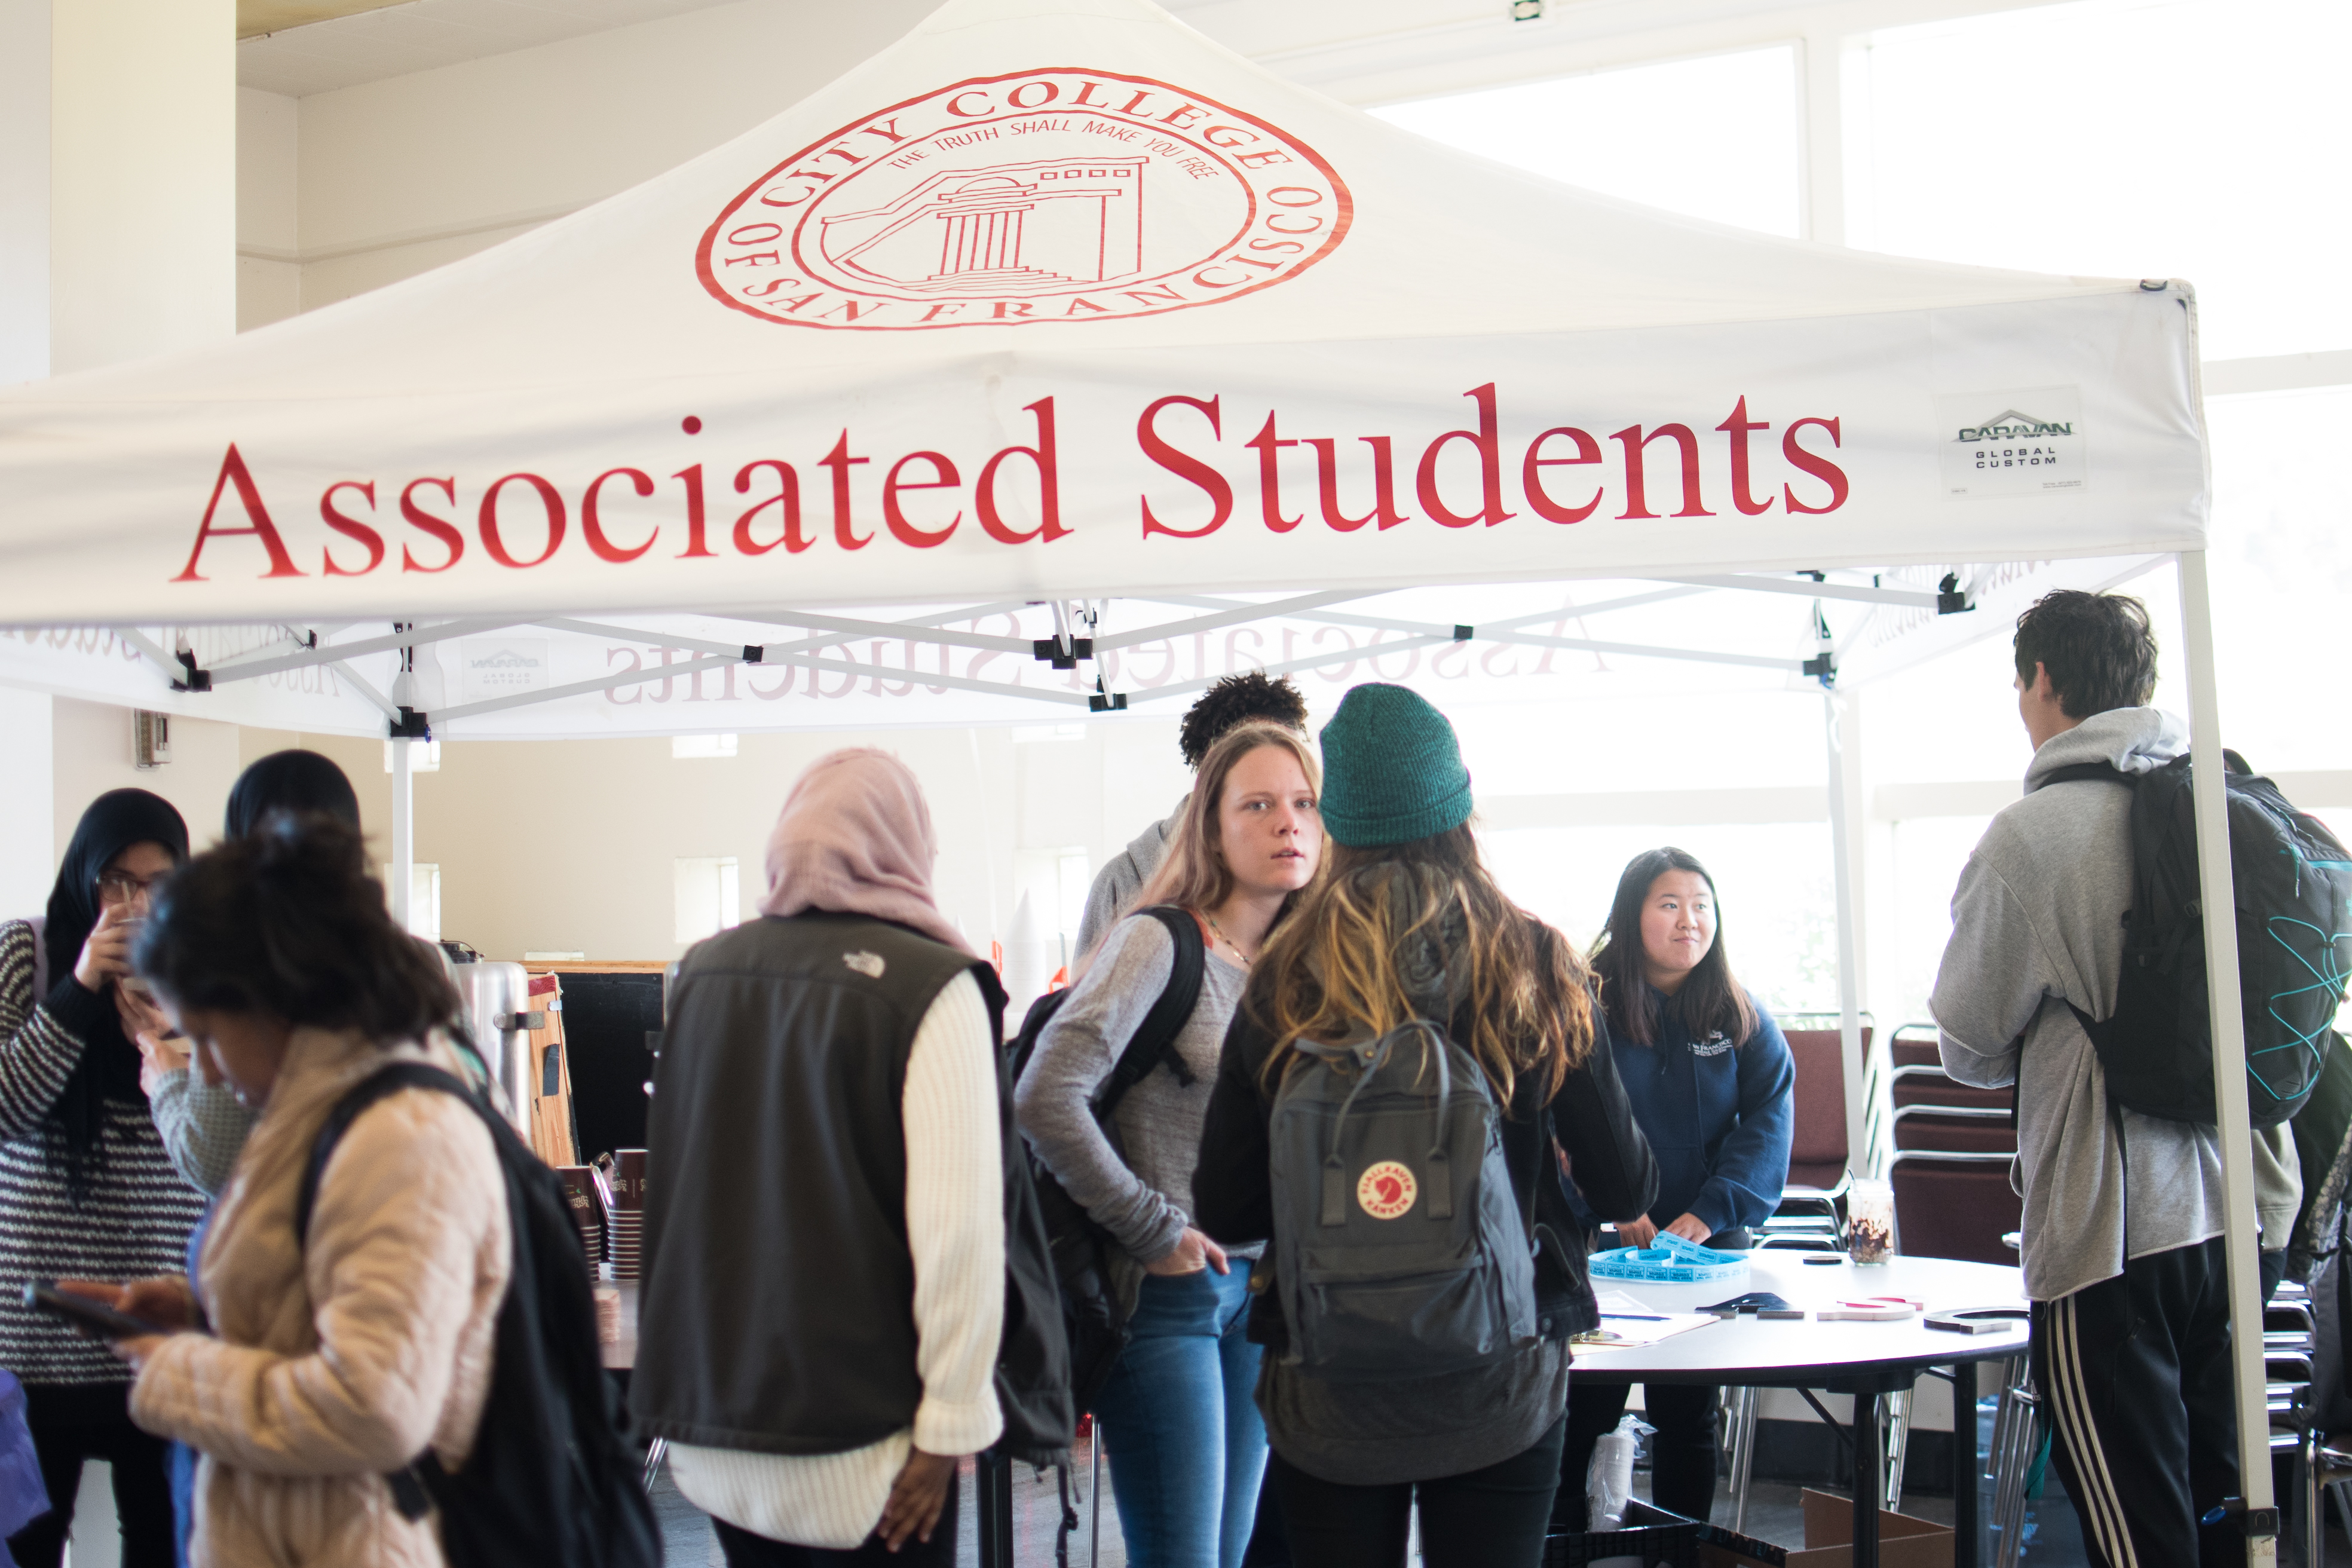 Associated Students’ pavillion at Multicultural Day in Smith Hall at Ocean Campus. Photo by Otto Pippenger, Nov. 10, 2017.